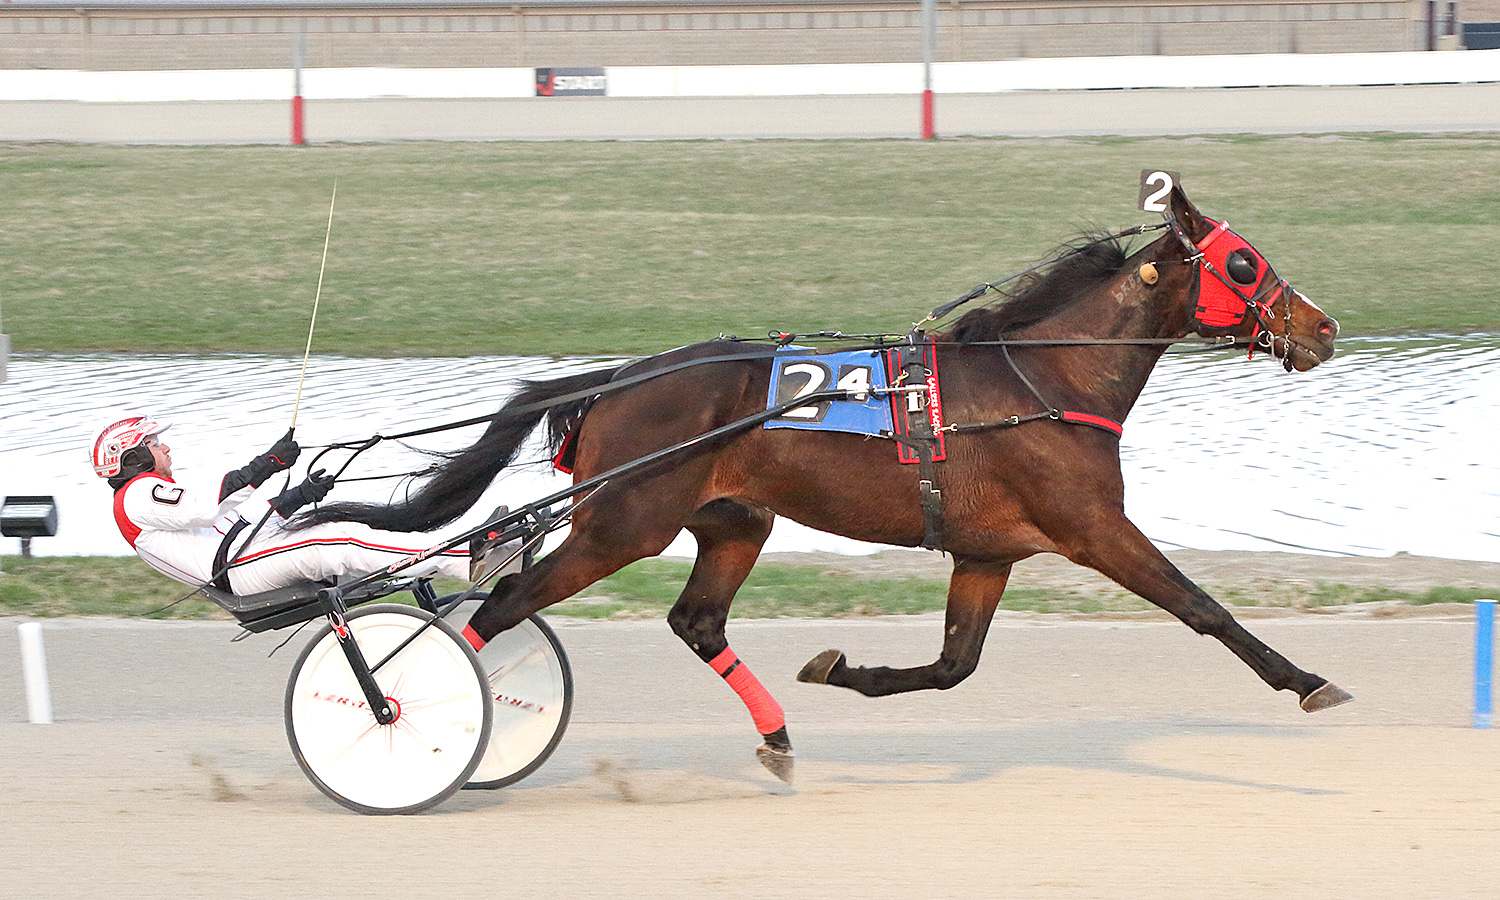 Track record trot highlights Friday action at Miami Valley U.S